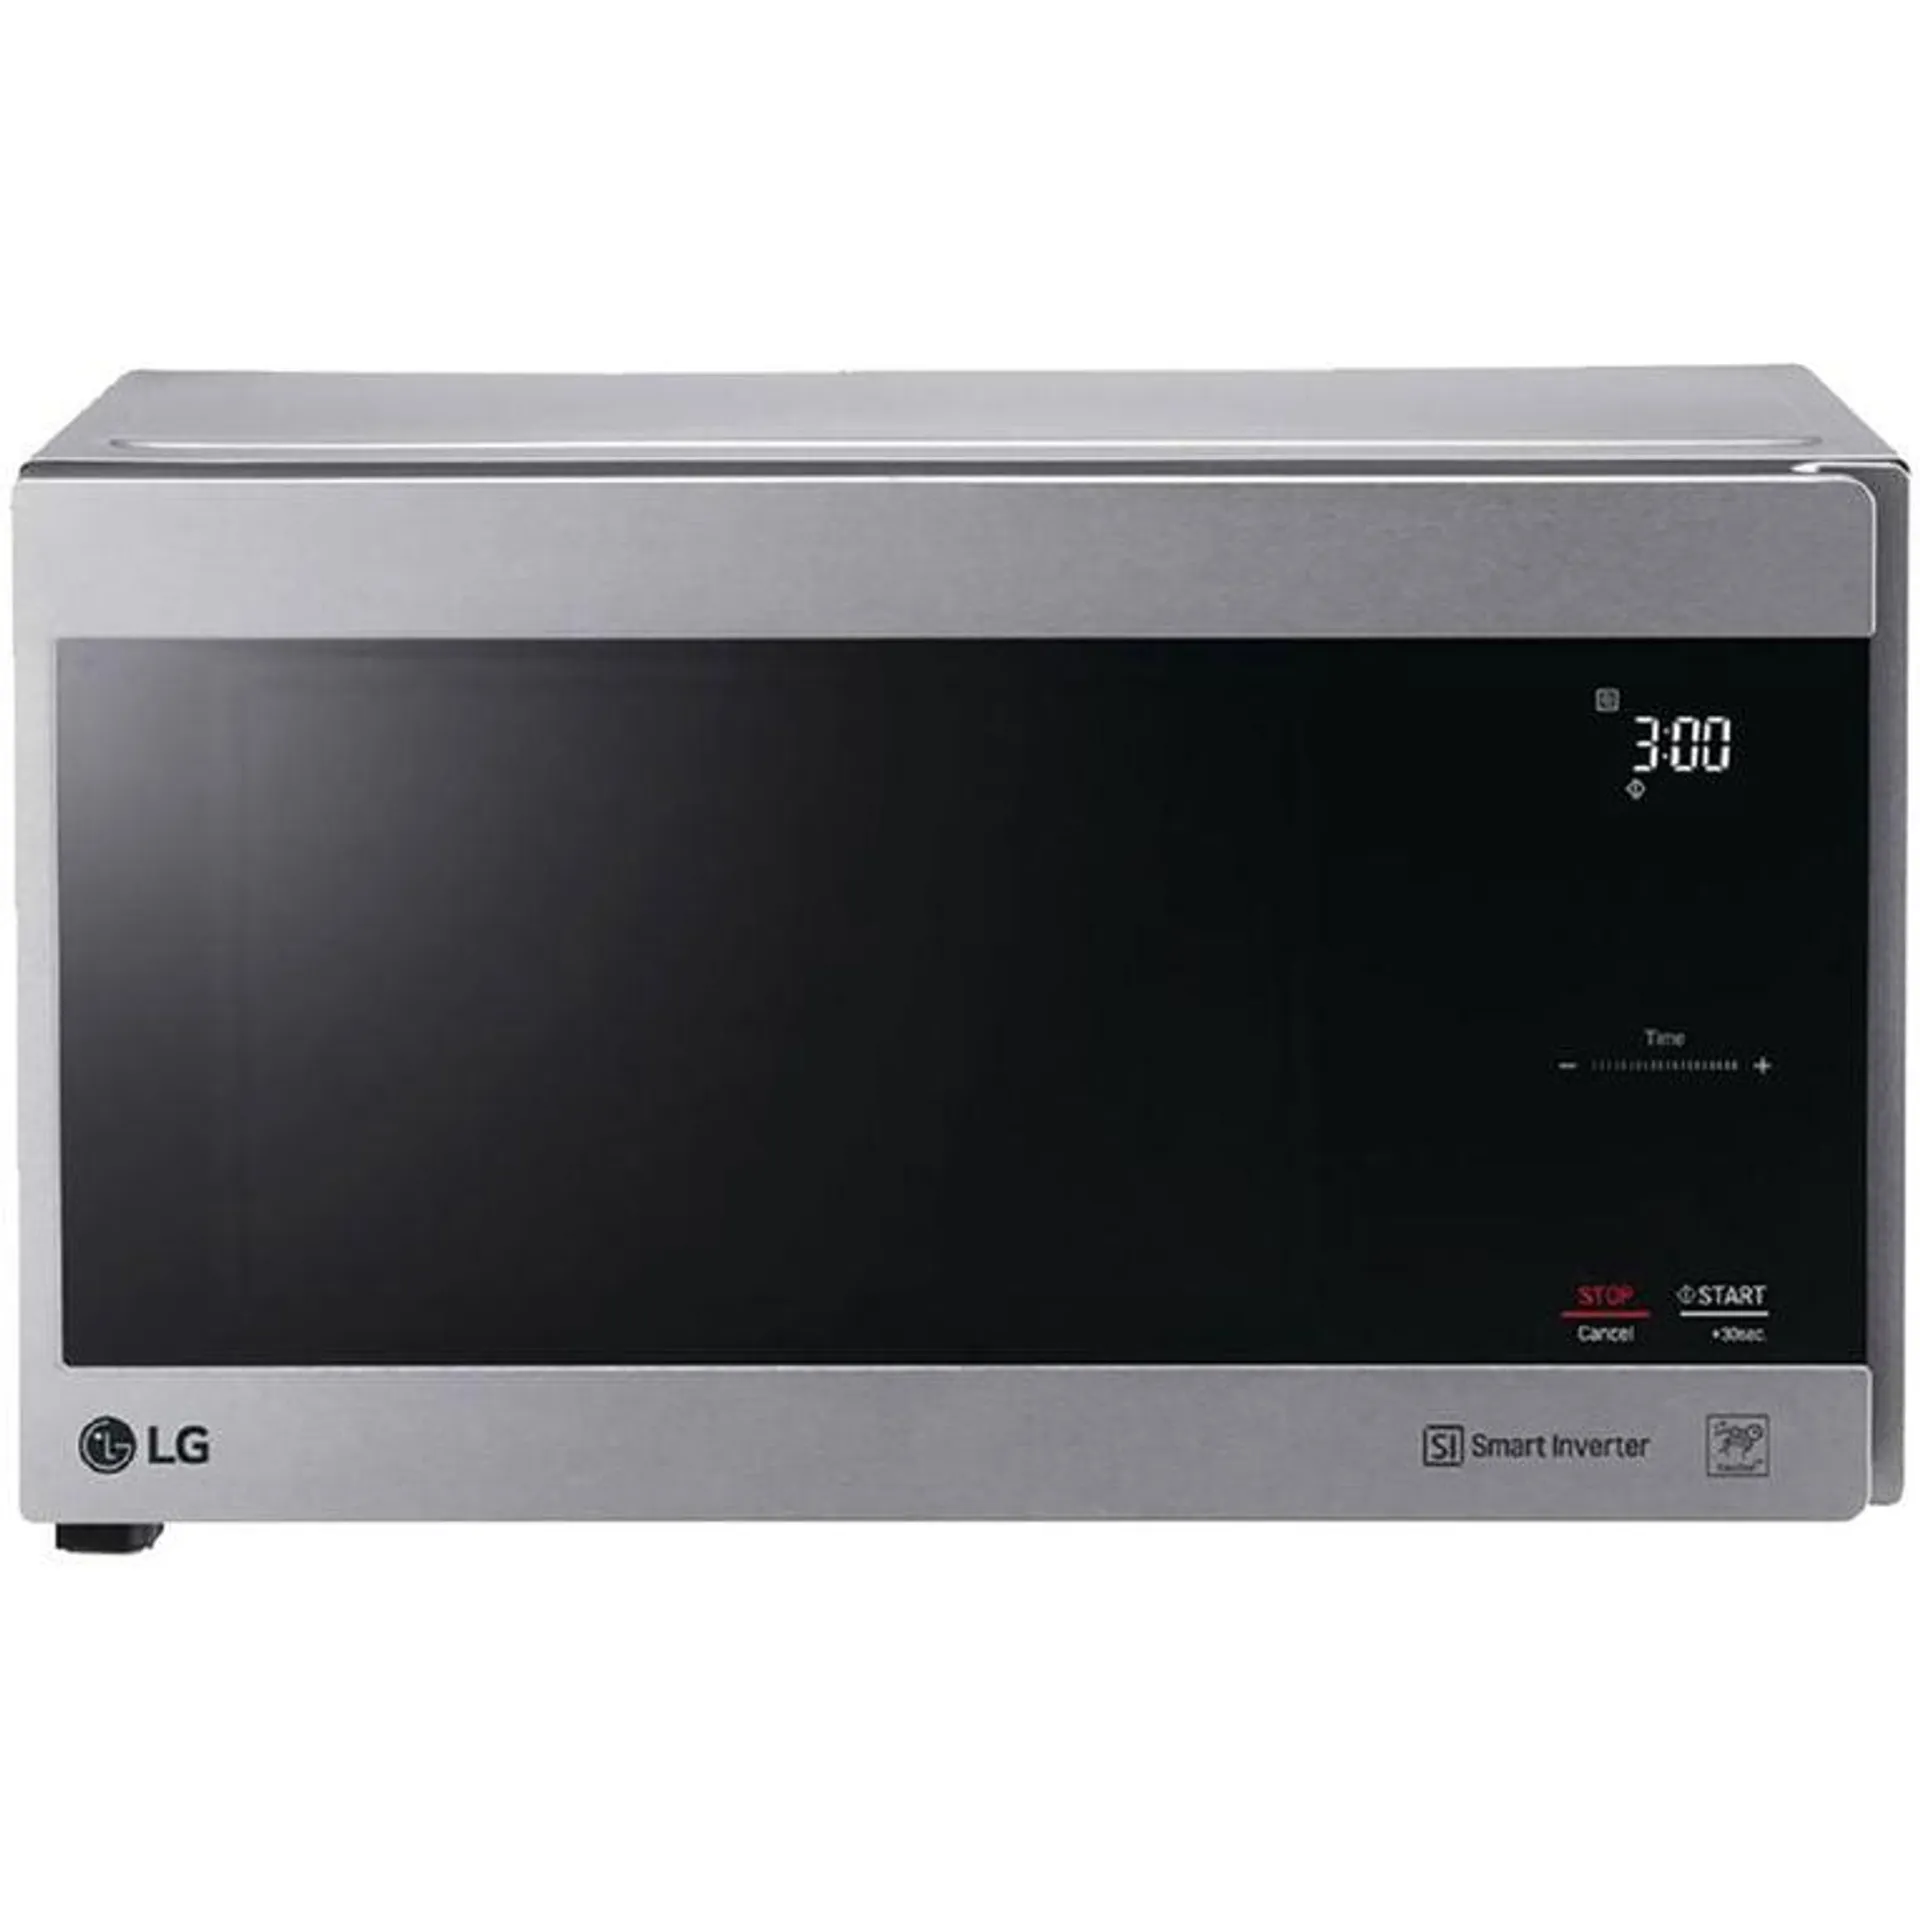 LG 42L NeoChef Smart Inverter Microwave - Stainless Steel